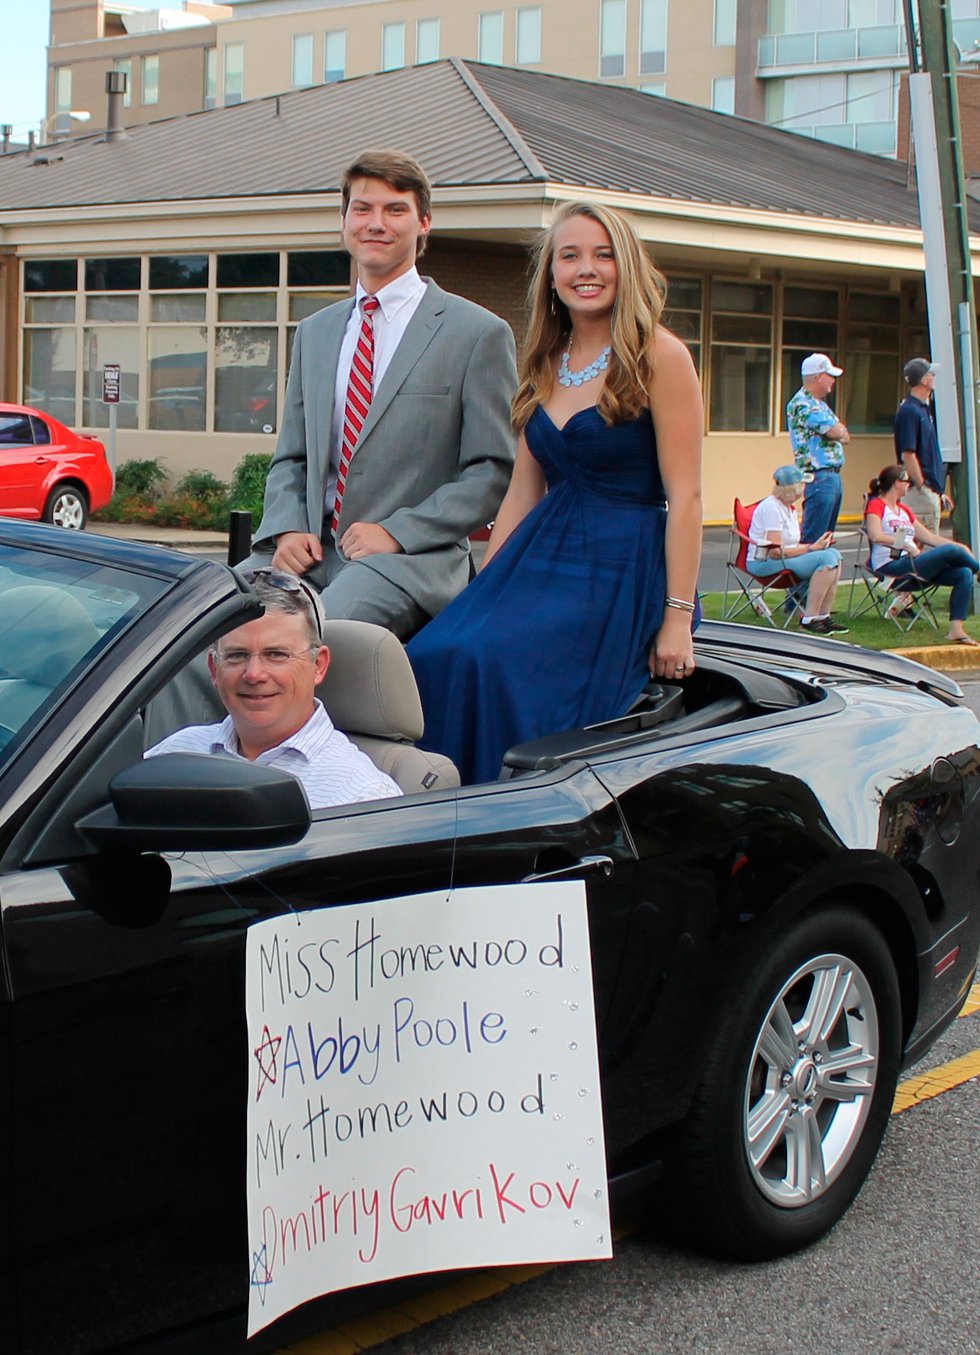 Mr. and Miss Homewood